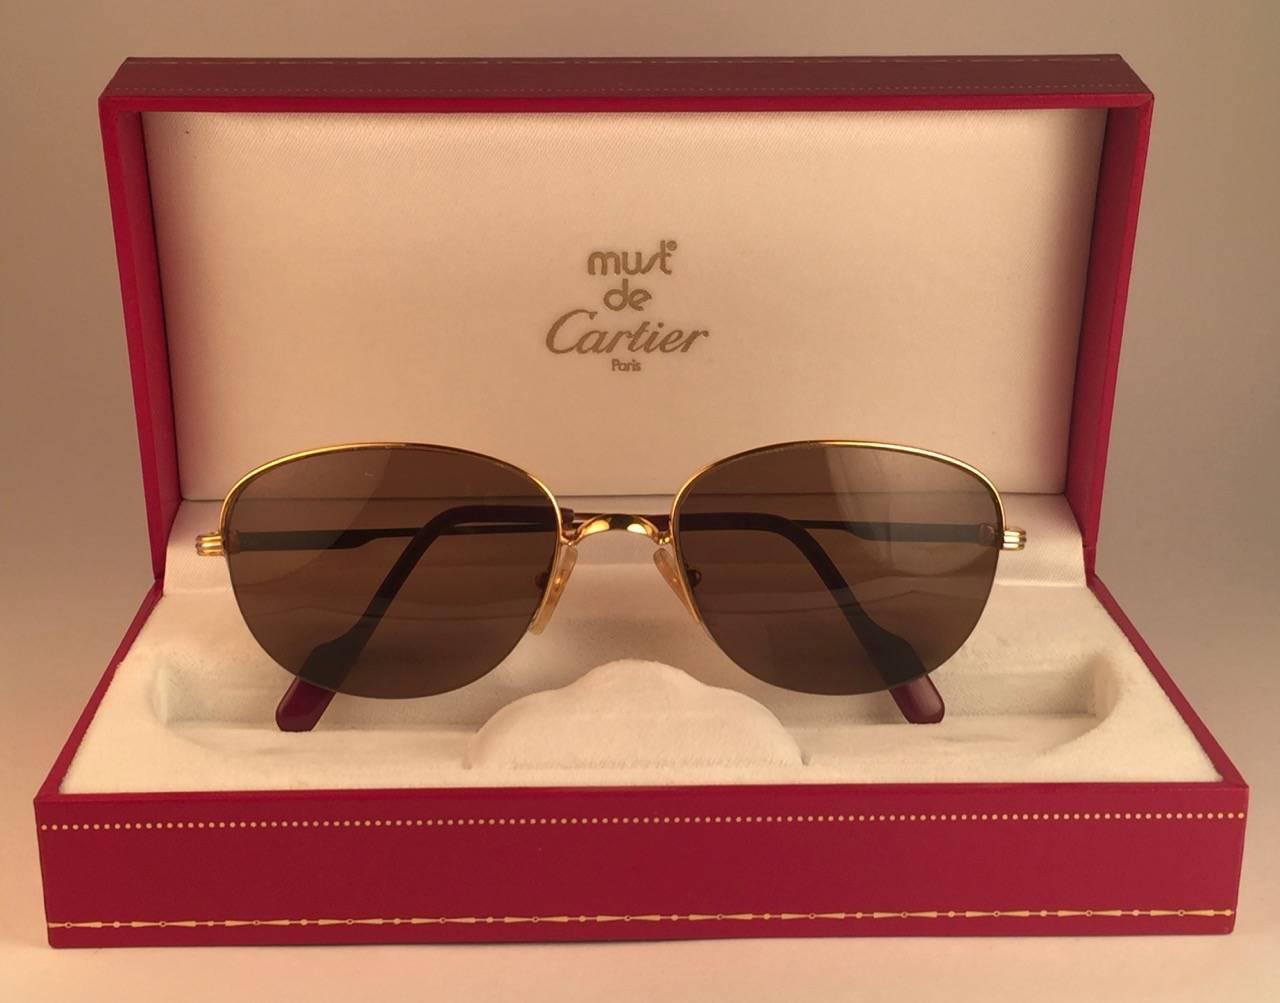 Cartier Montaigne Half Frame 53mm Sunglasses 18k Gold Sunglasses France In Excellent Condition For Sale In Baleares, Baleares